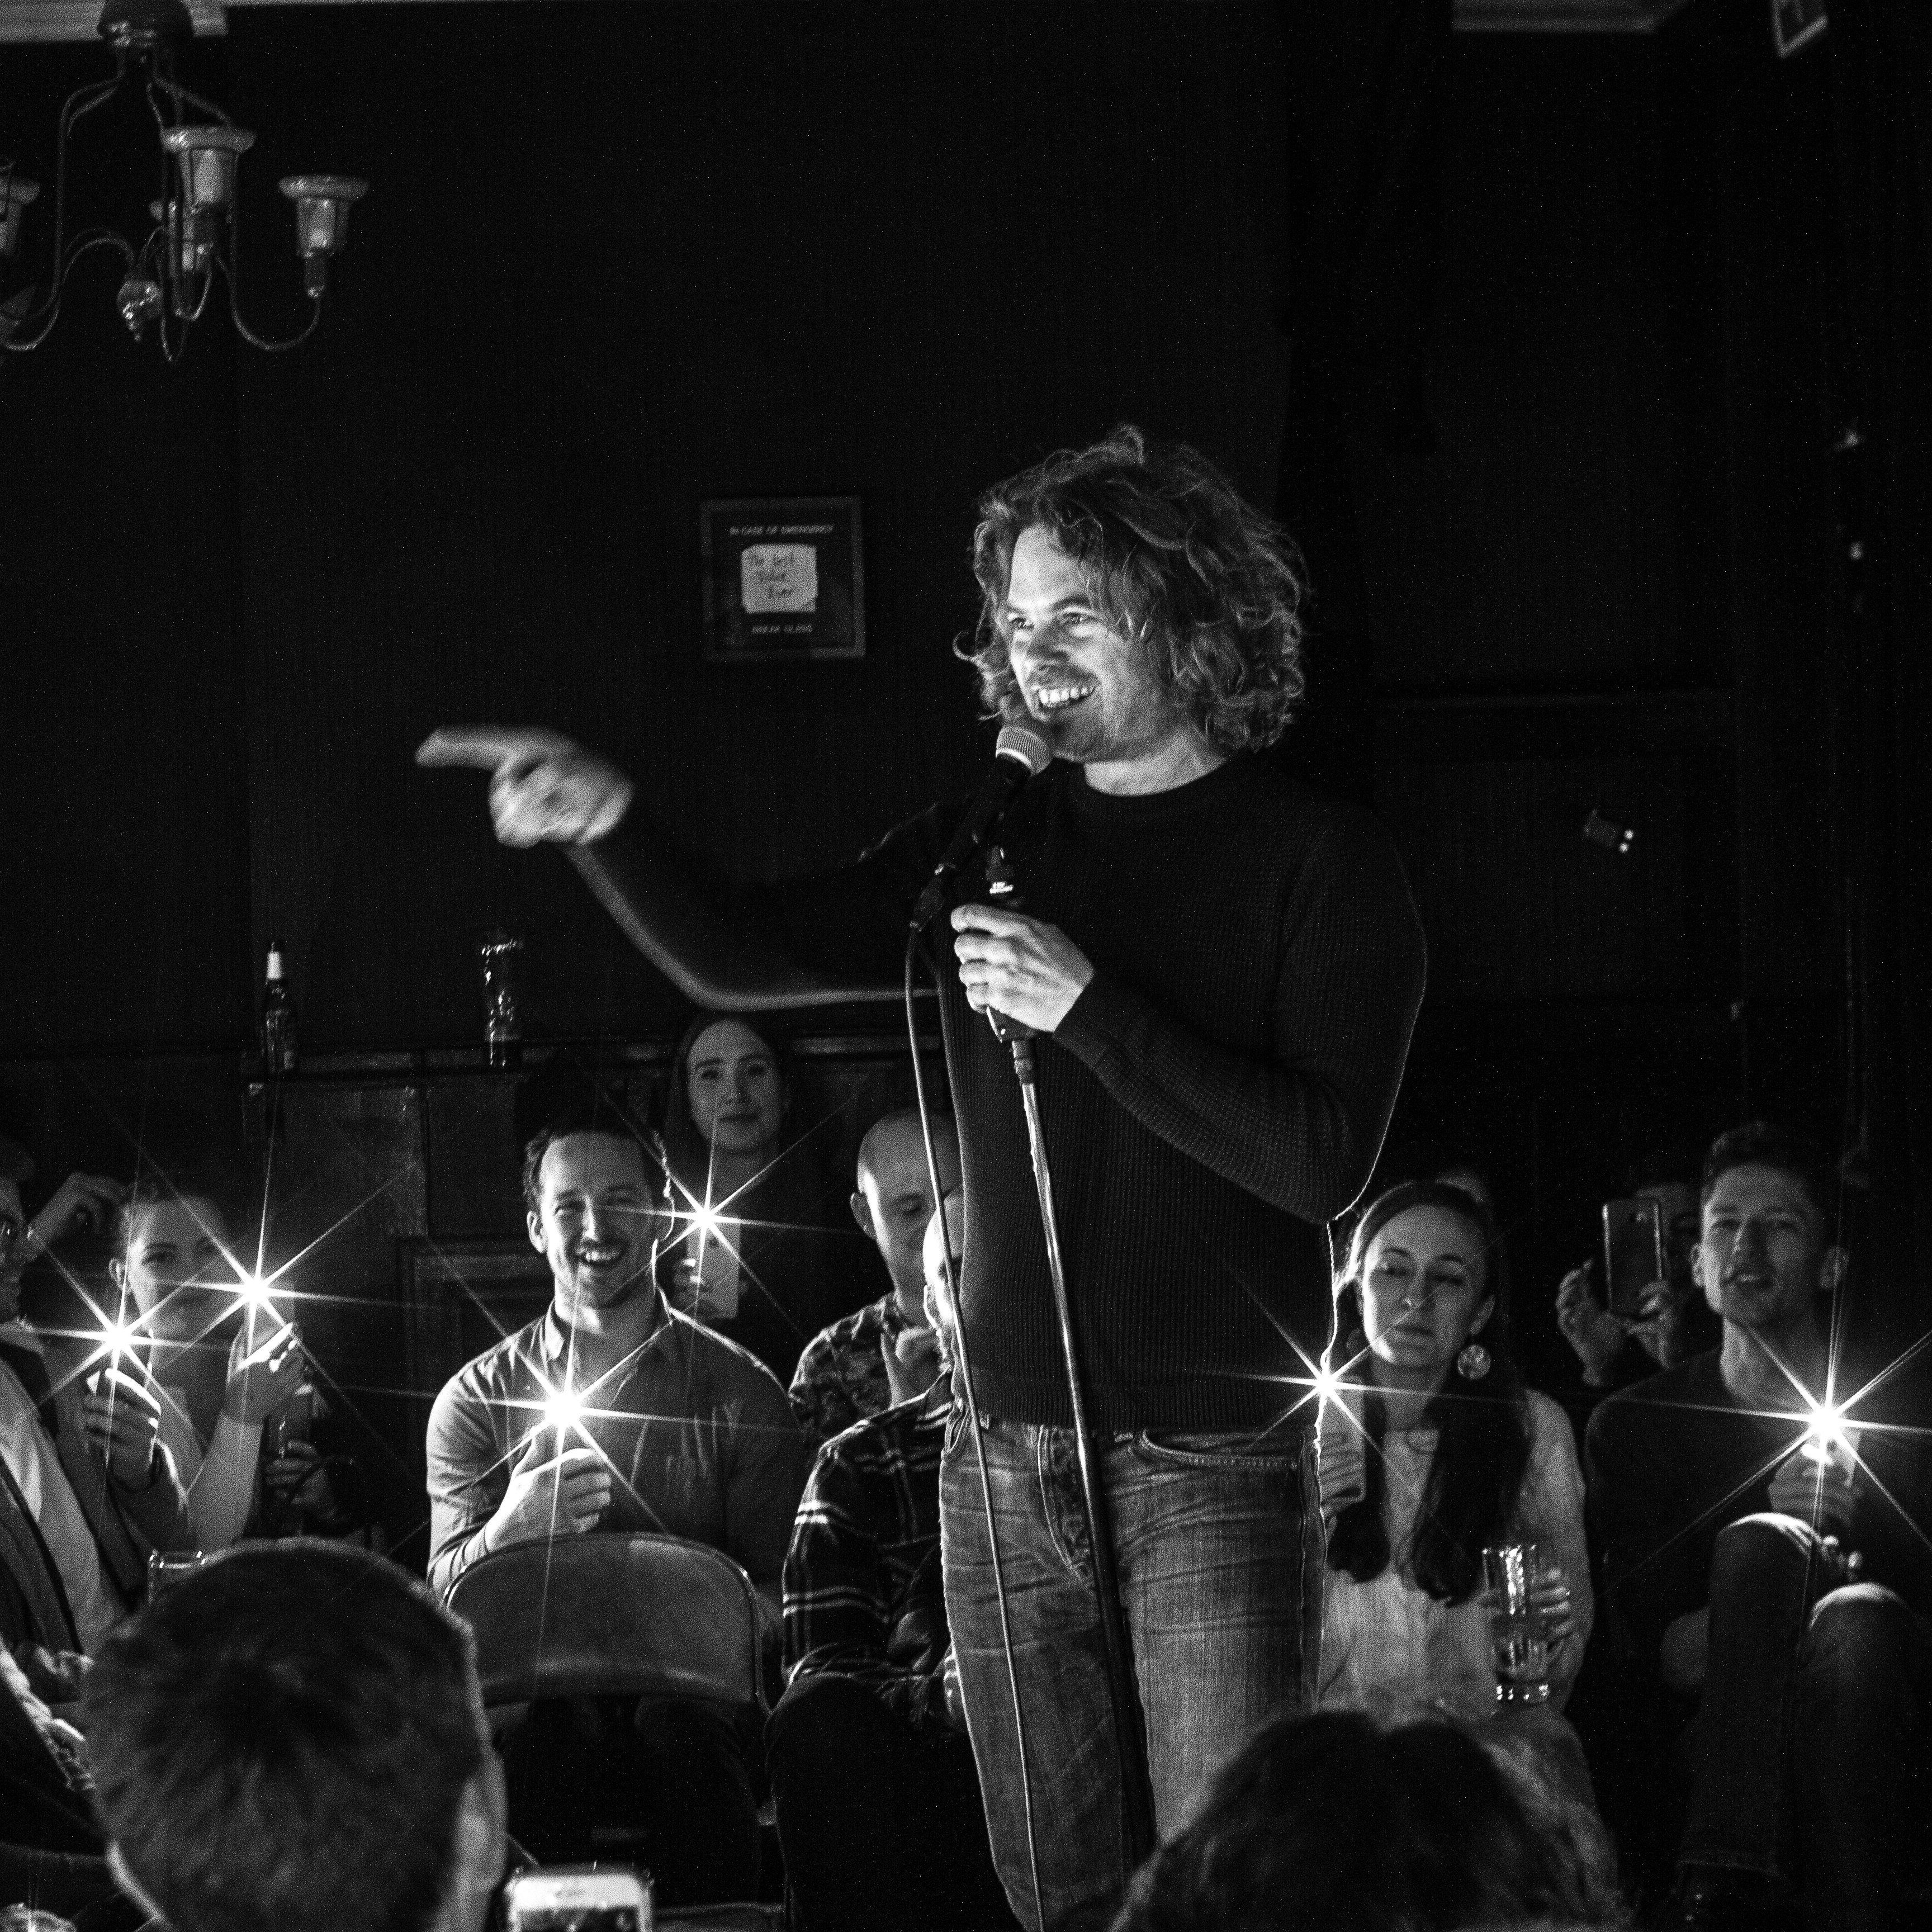 Barry Ferns @ The Bill Murray at The Bill Murray - Angel Comedy